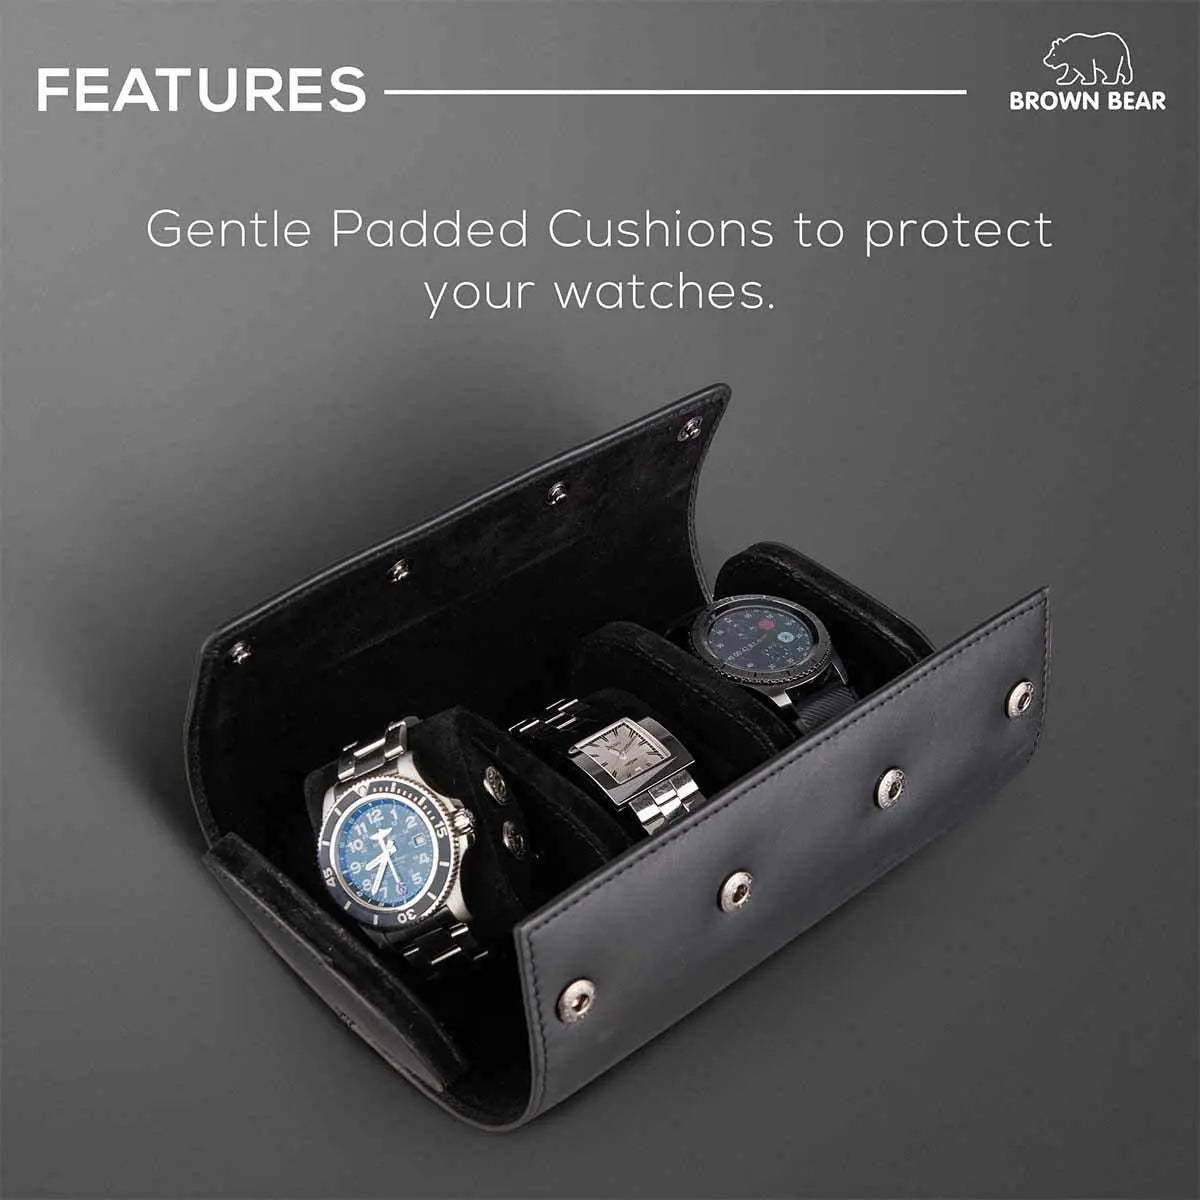 Watch Case for Men - Watch Roll Travel Case - Storage Organizer and Display  - Fits All Wrist Watches & Smart WatchesUp to 50mm (3-watch case) :  Amazon.in: Watches